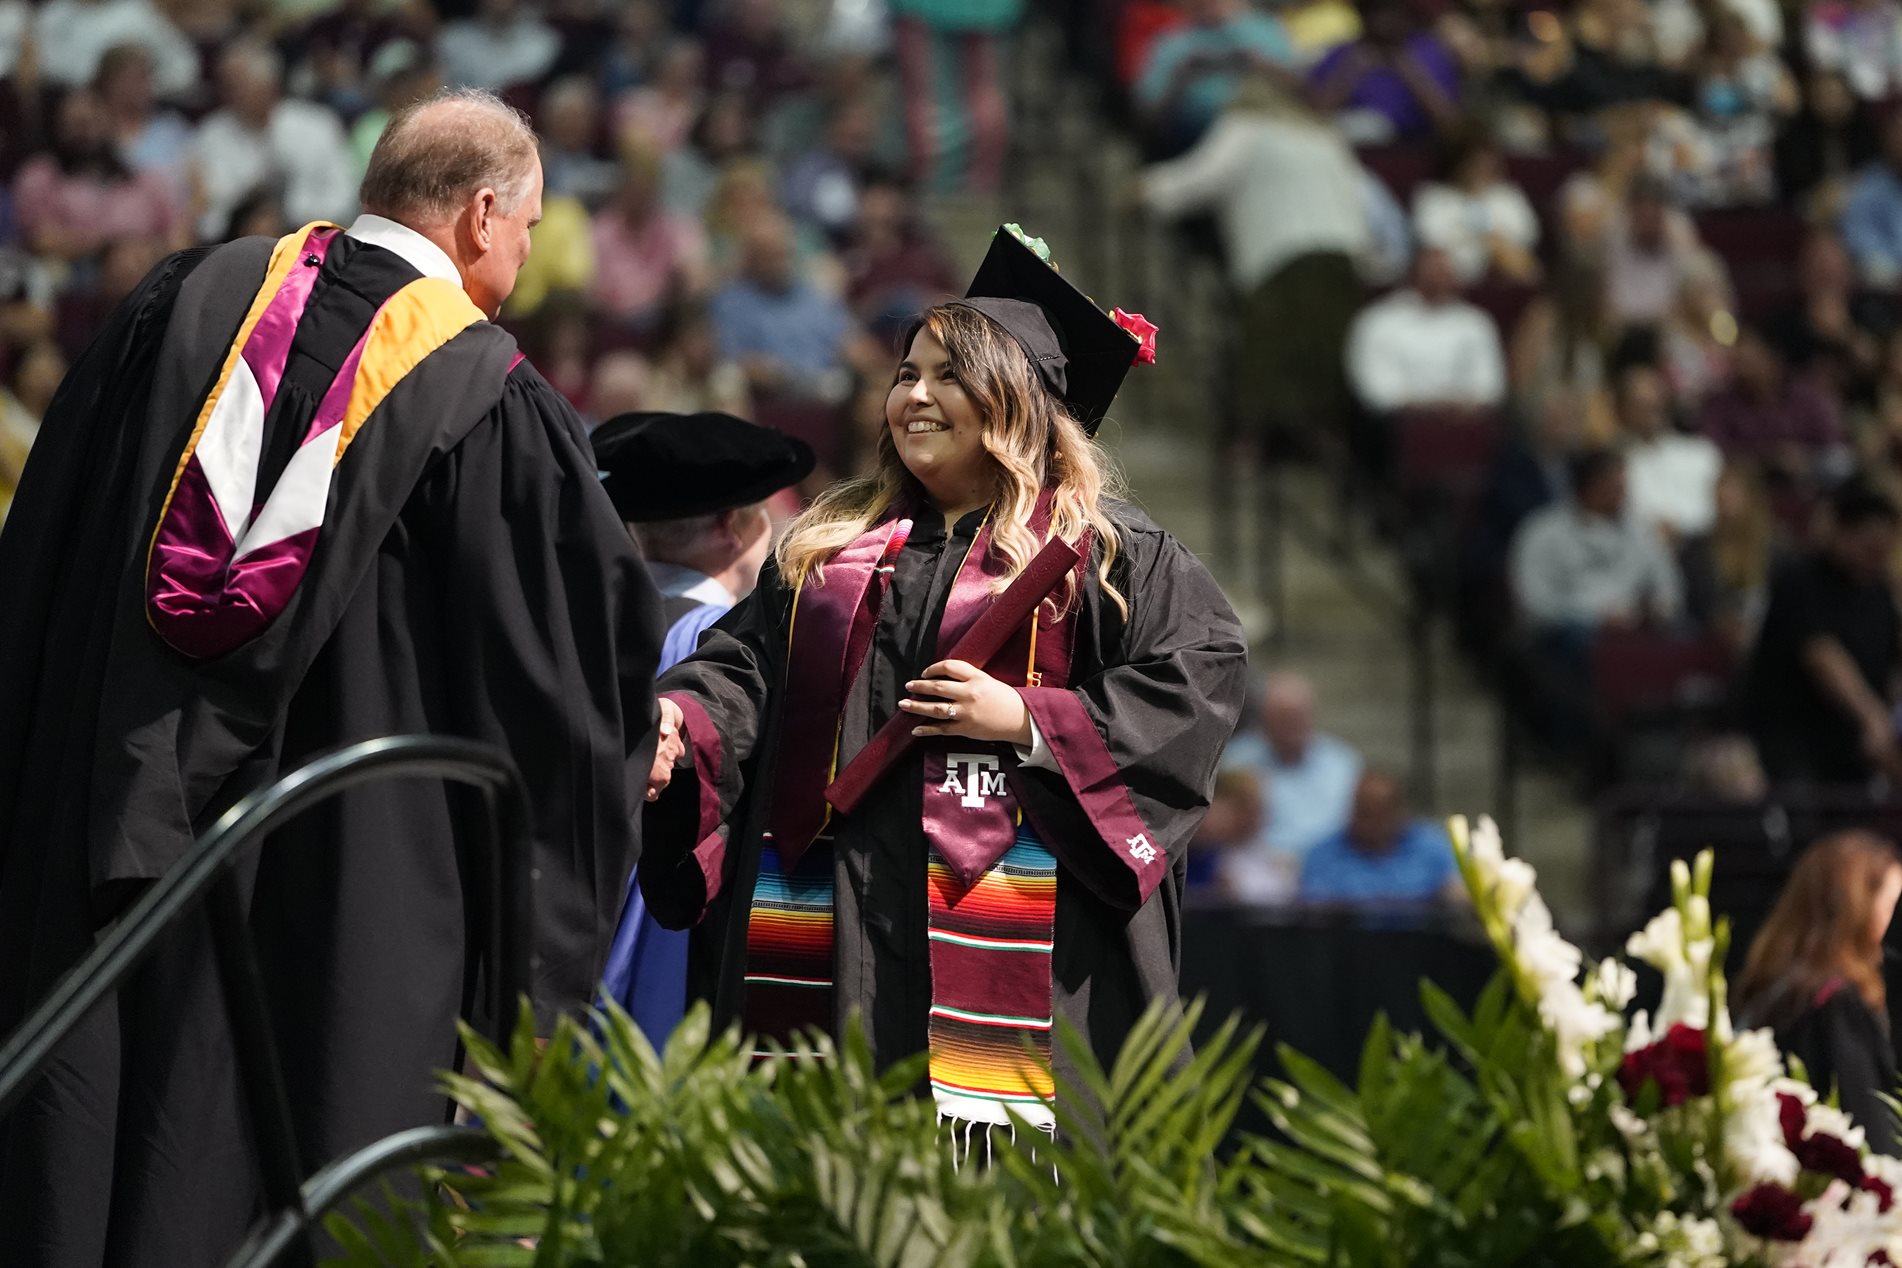 College graduate crossing the stage with smile as she shakes hands with faculty